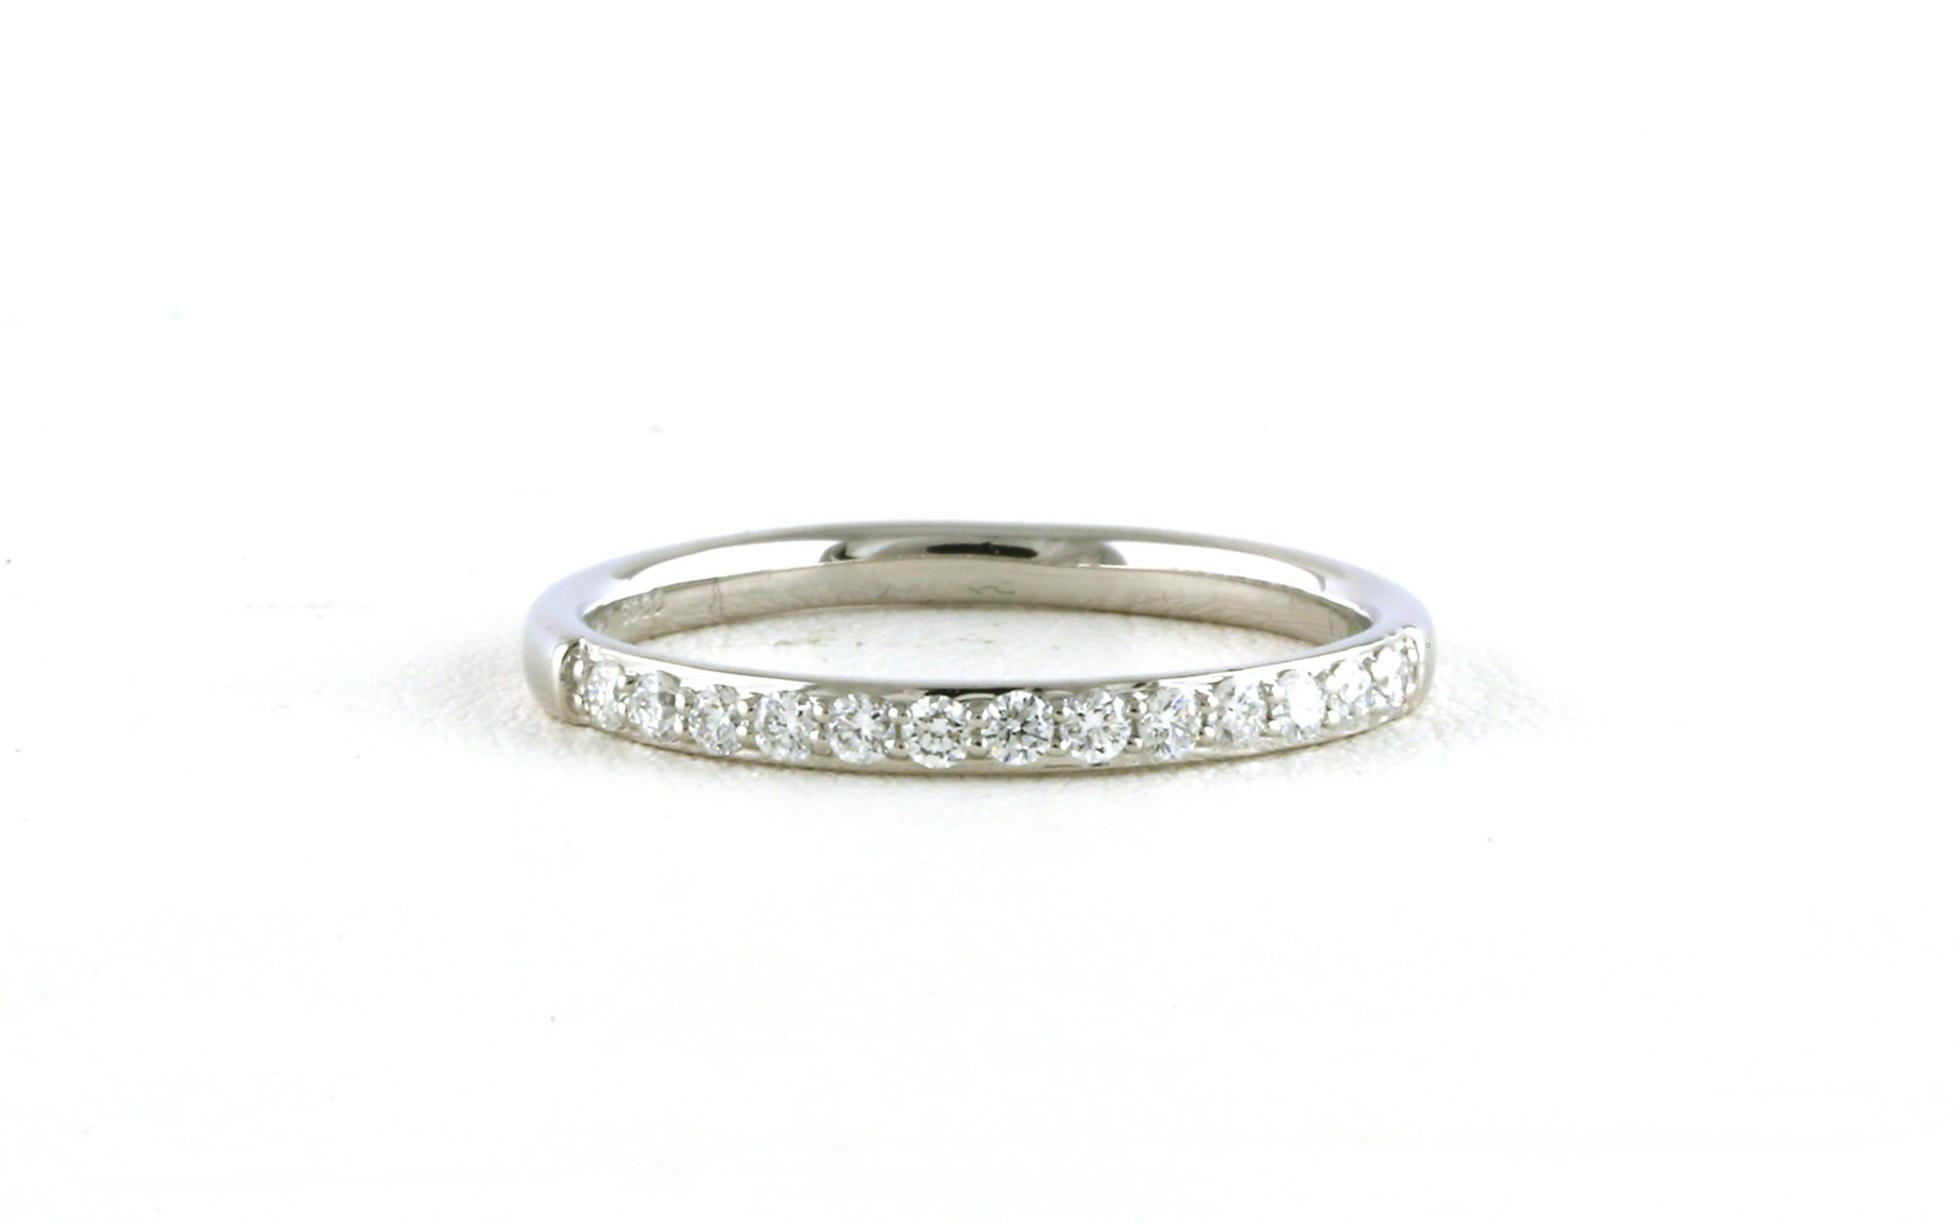 13-Stone Share-prong Diamond Wedding Band in White Gold (0.25cts TWT)